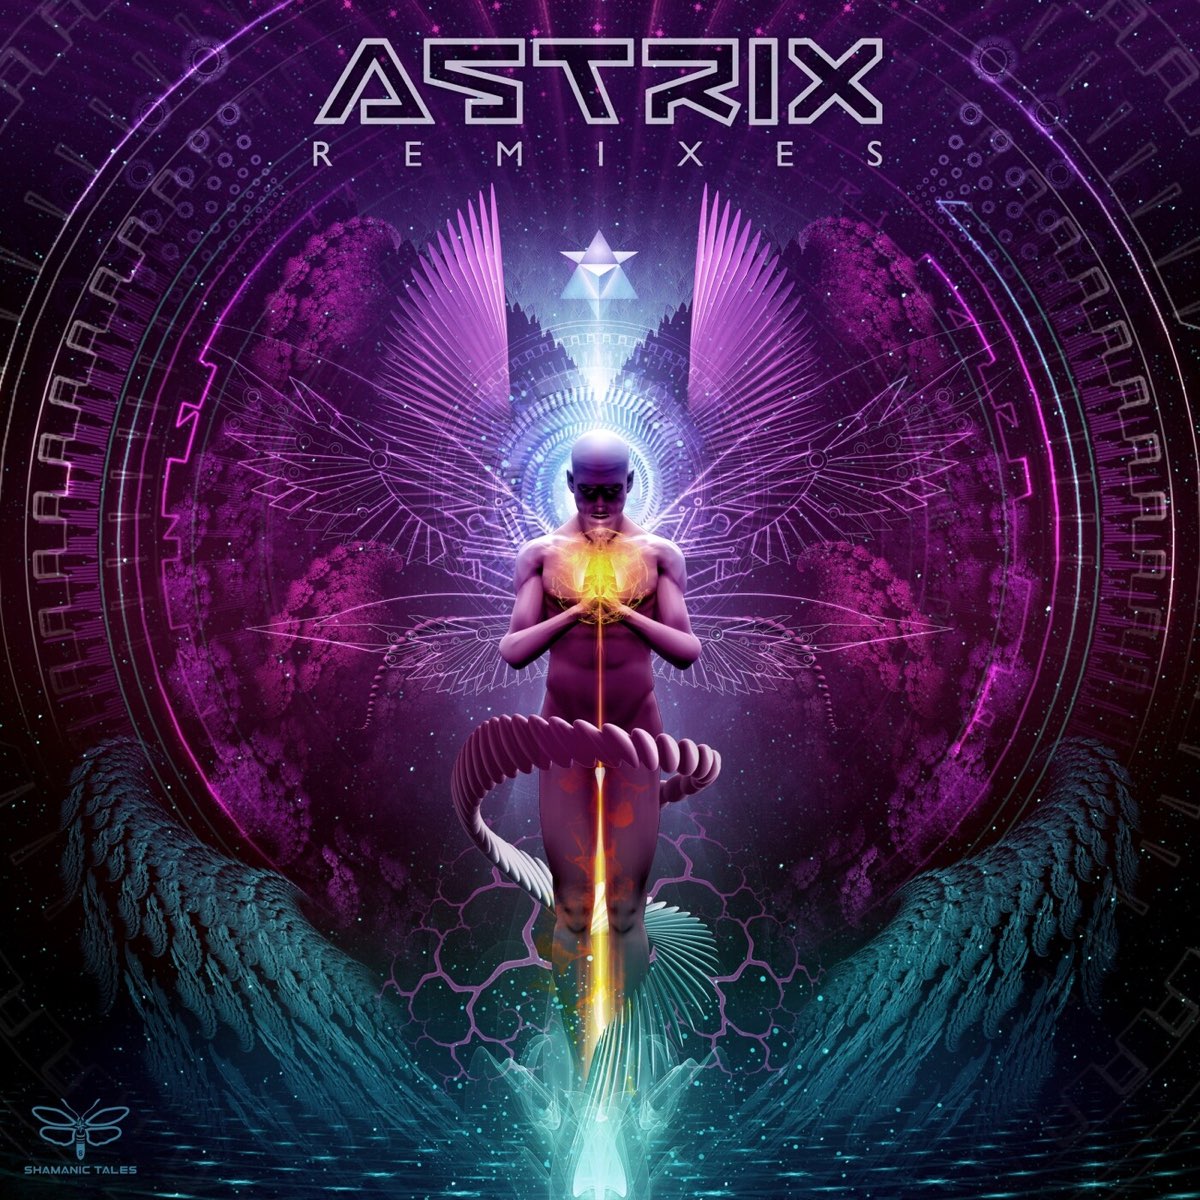 ‎Astrix (Remixes) by Astrix on Apple Music